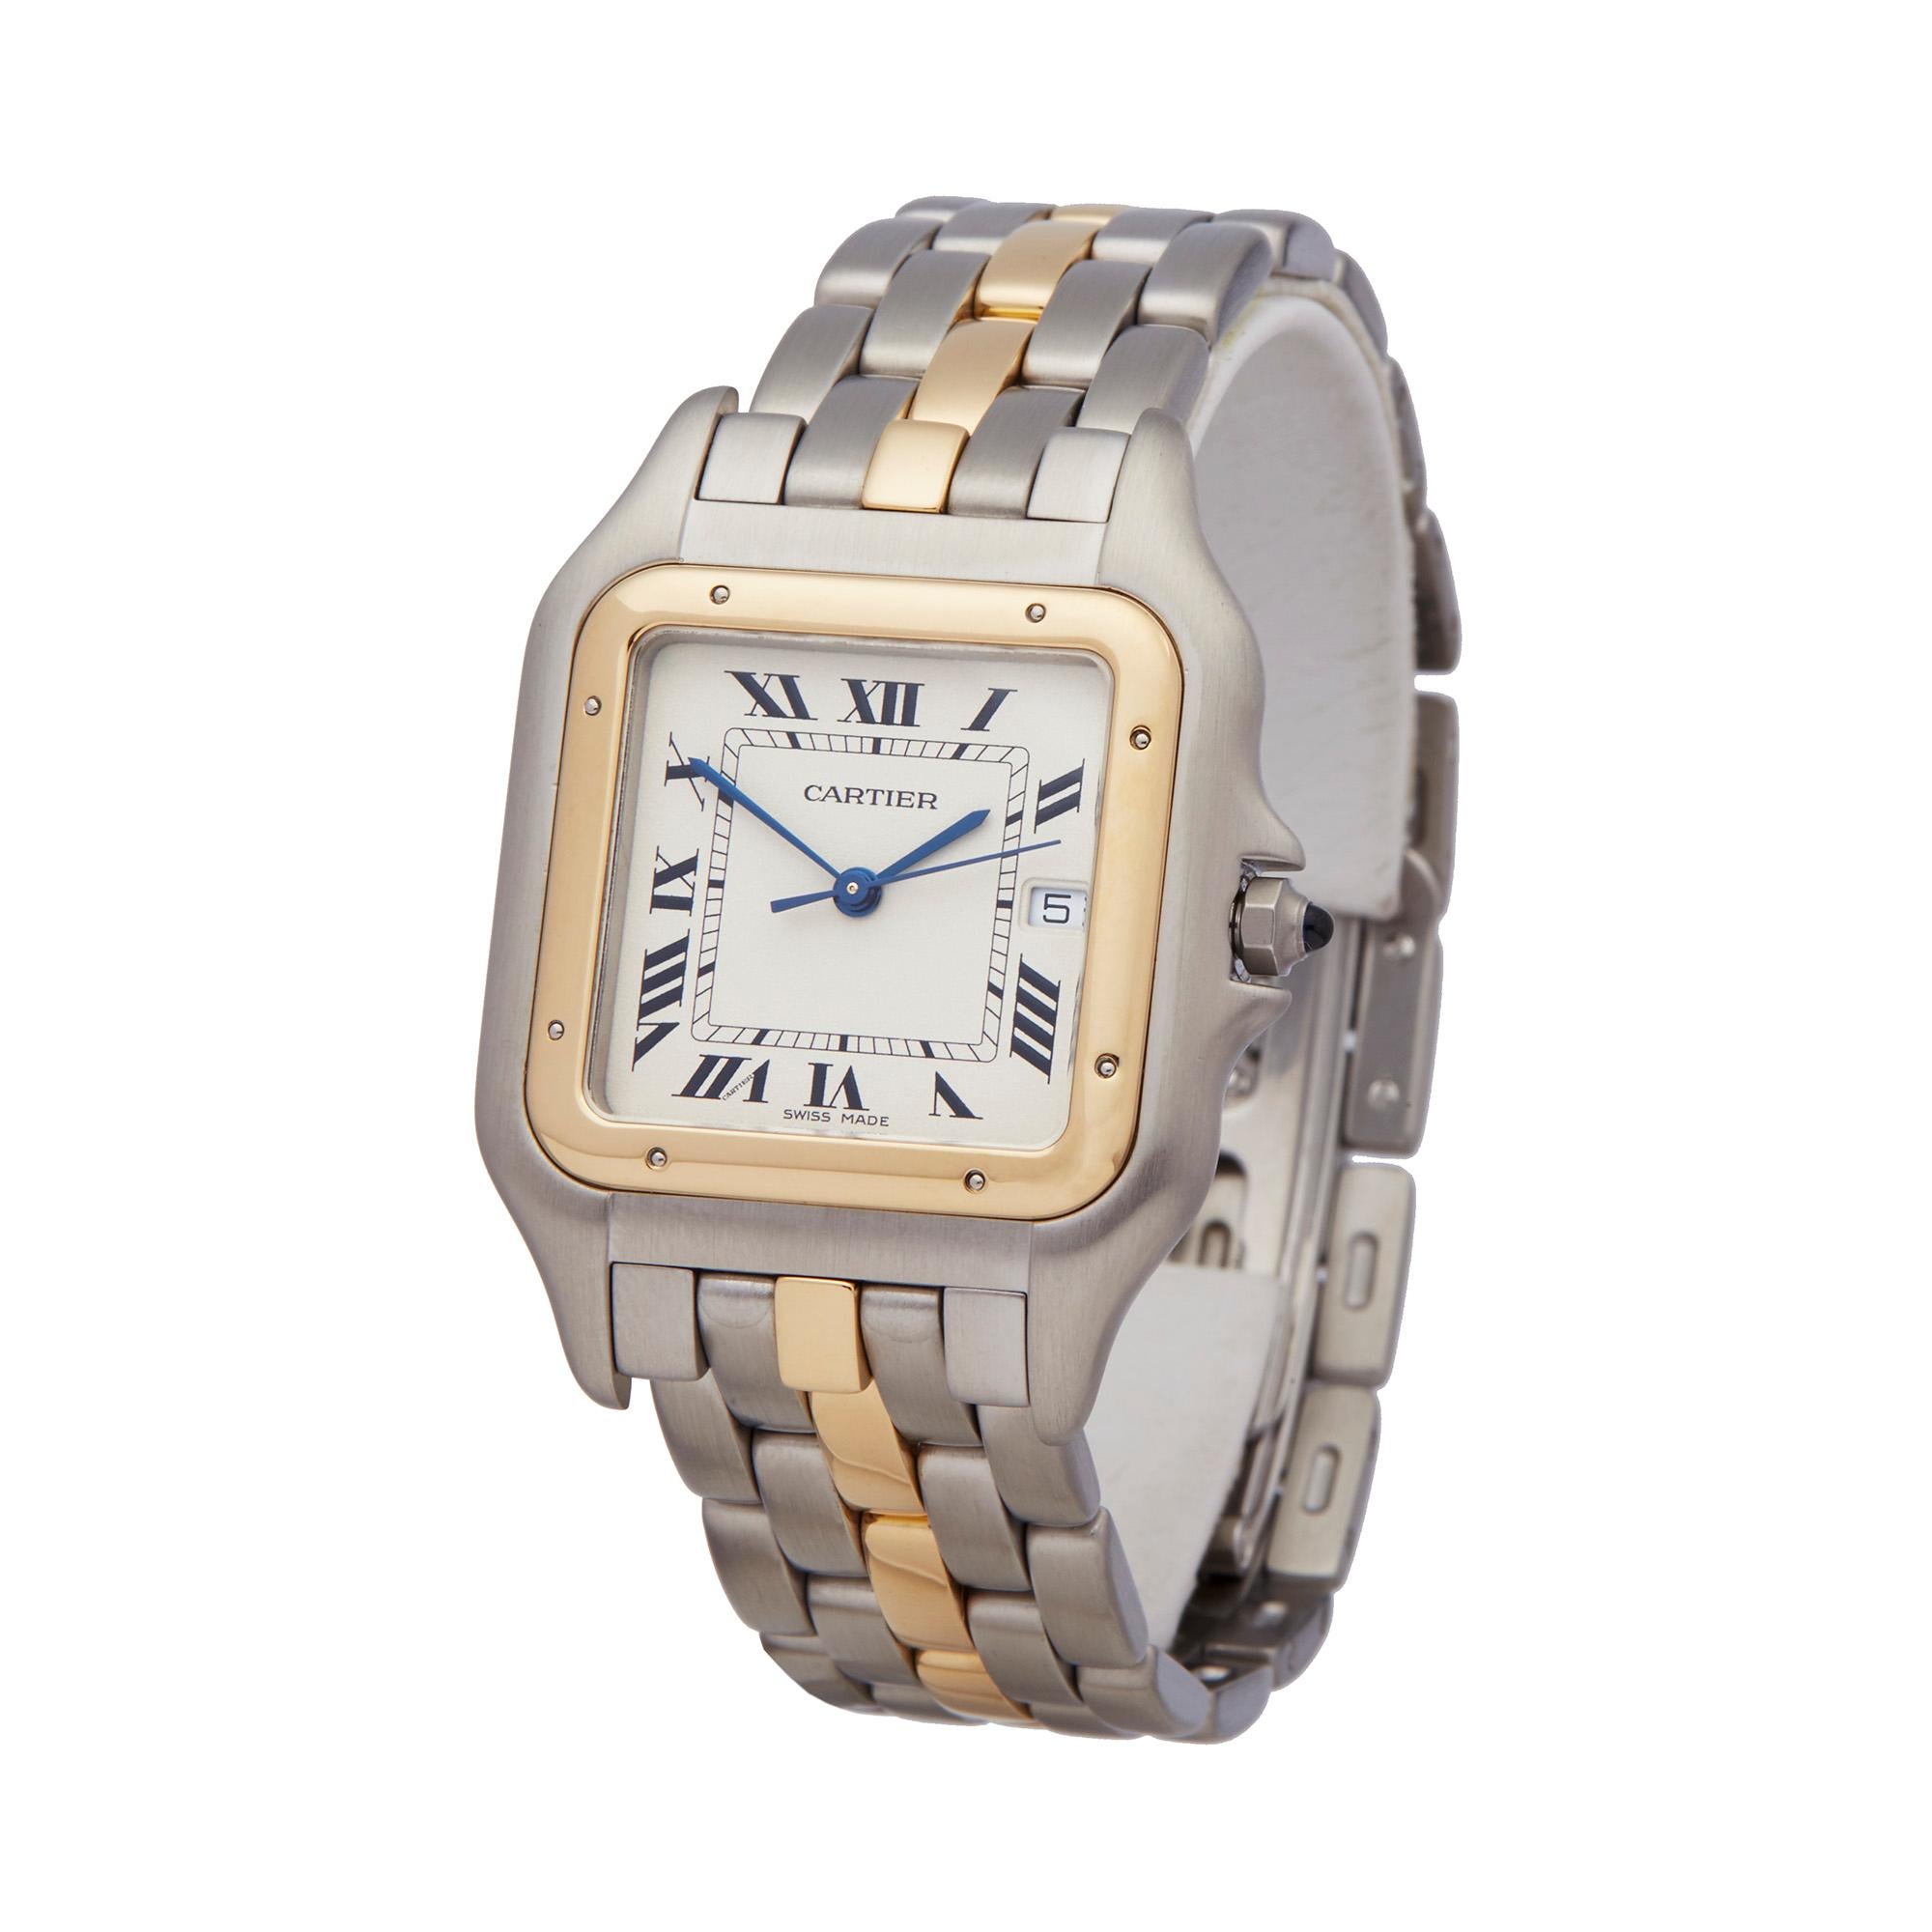 Reference: W5533
Manufacturer: Cartier
Model: Panthère
Model Reference: 8395
Age: Circa 2000's
Gender: Men's
Box and Papers: Presentation Box, Service Pouch and Service Papers
Dial: White Roman
Glass: Sapphire Crystal
Movement: Quartz
Water